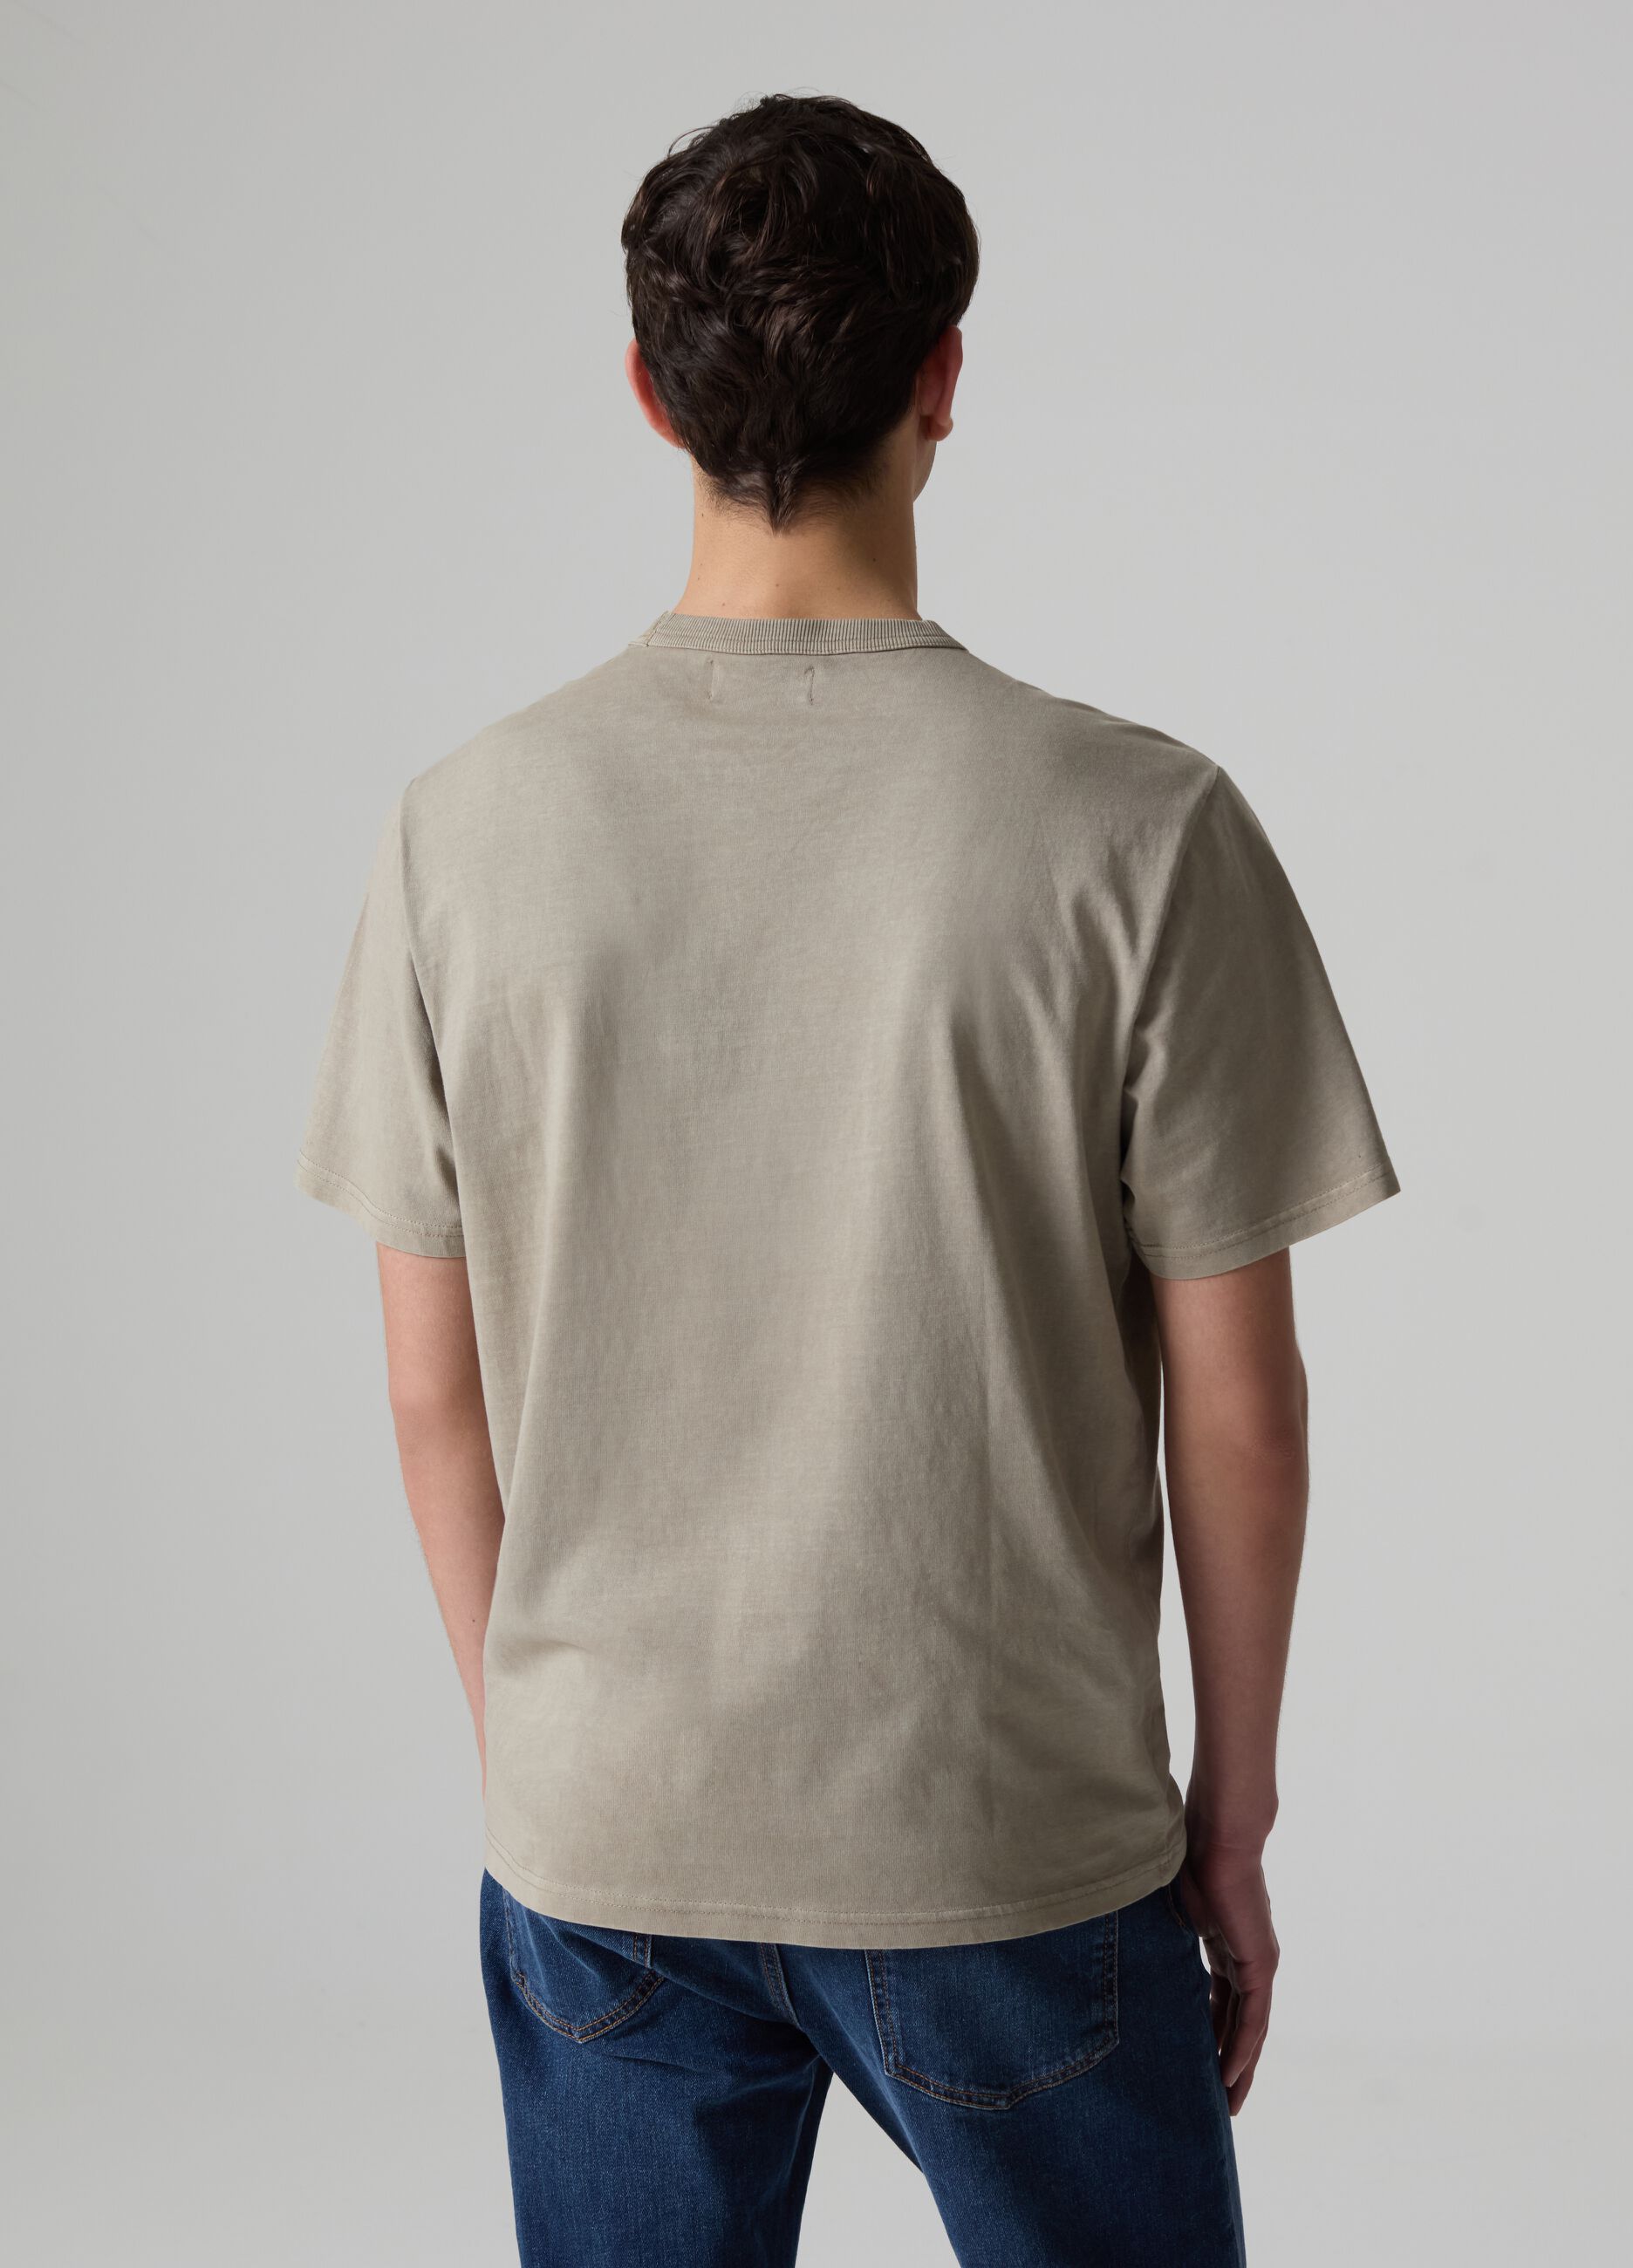 T-shirt with round neck and pocket